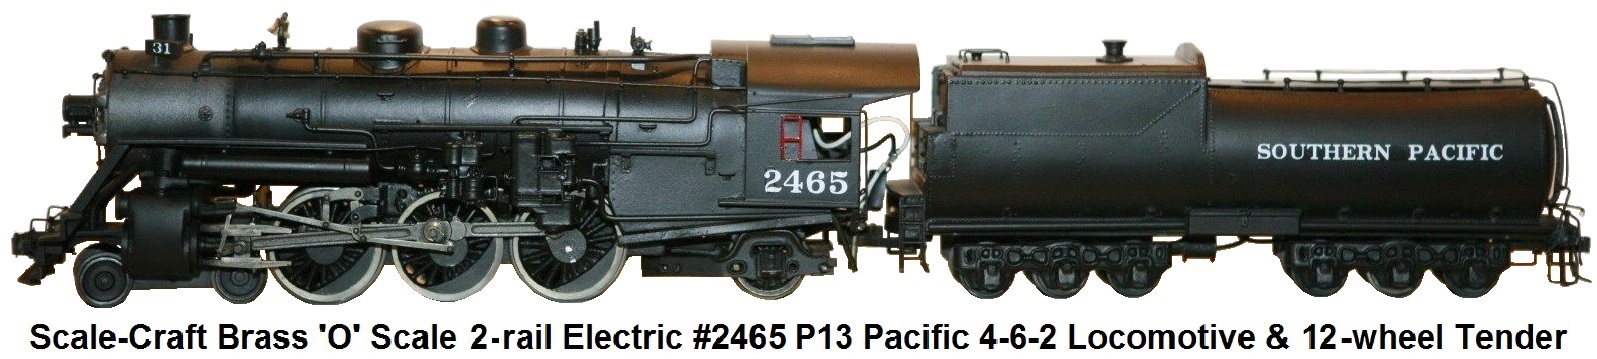 Scale-Craft Brass 'O' Scale P13 Pacific Locomotive #2462 4-6-2 Two-Rail Electric